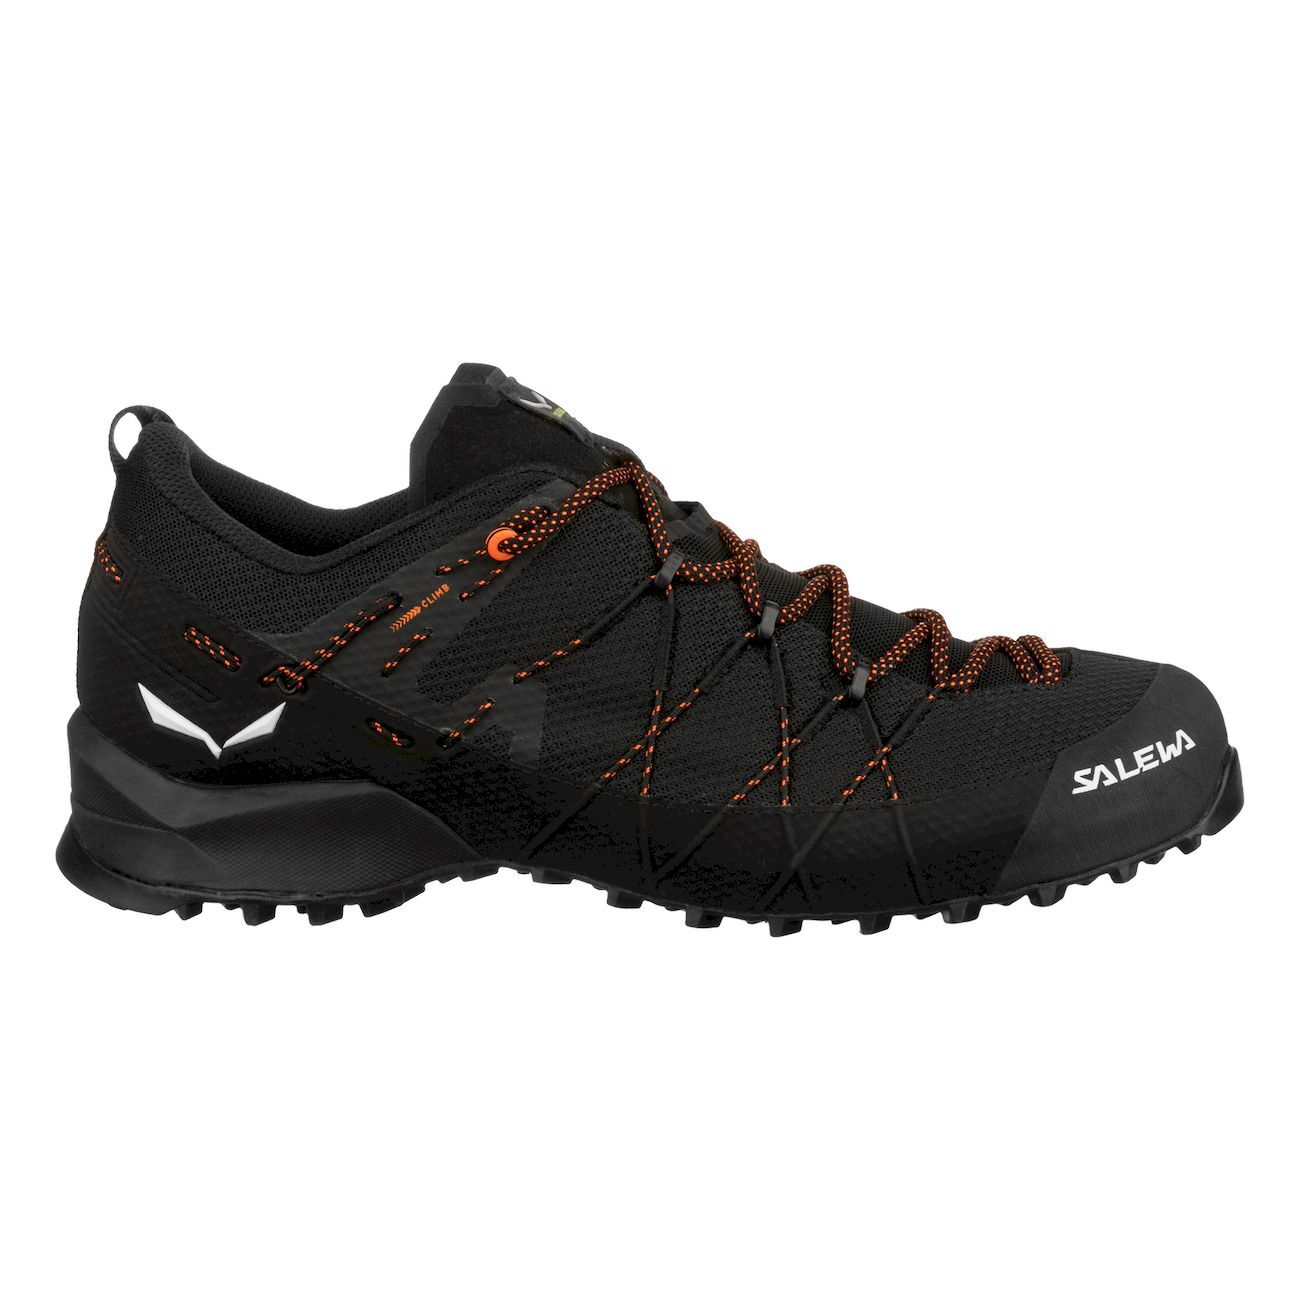 Salewa Wildfire 2 - Approach shoes - Men's